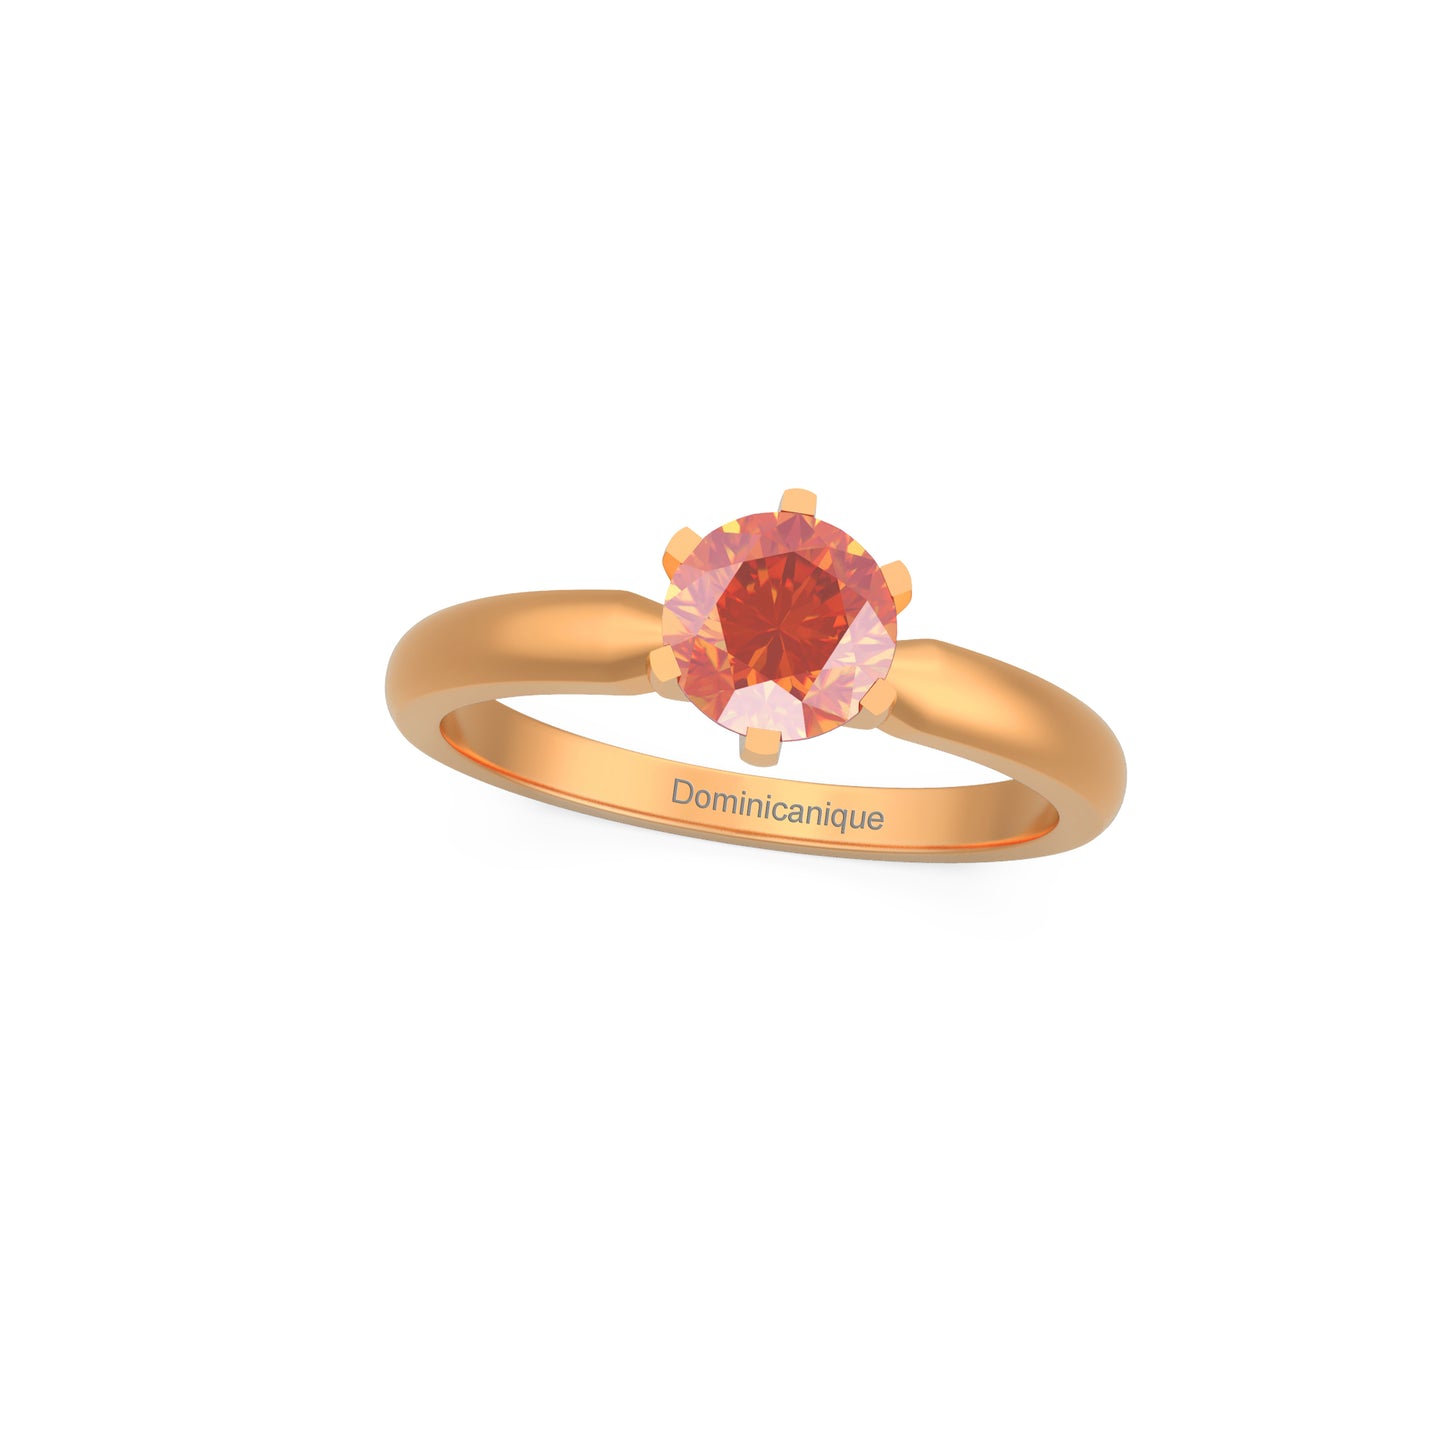 “RF85150" Ring with 0.95ct Dominicanique